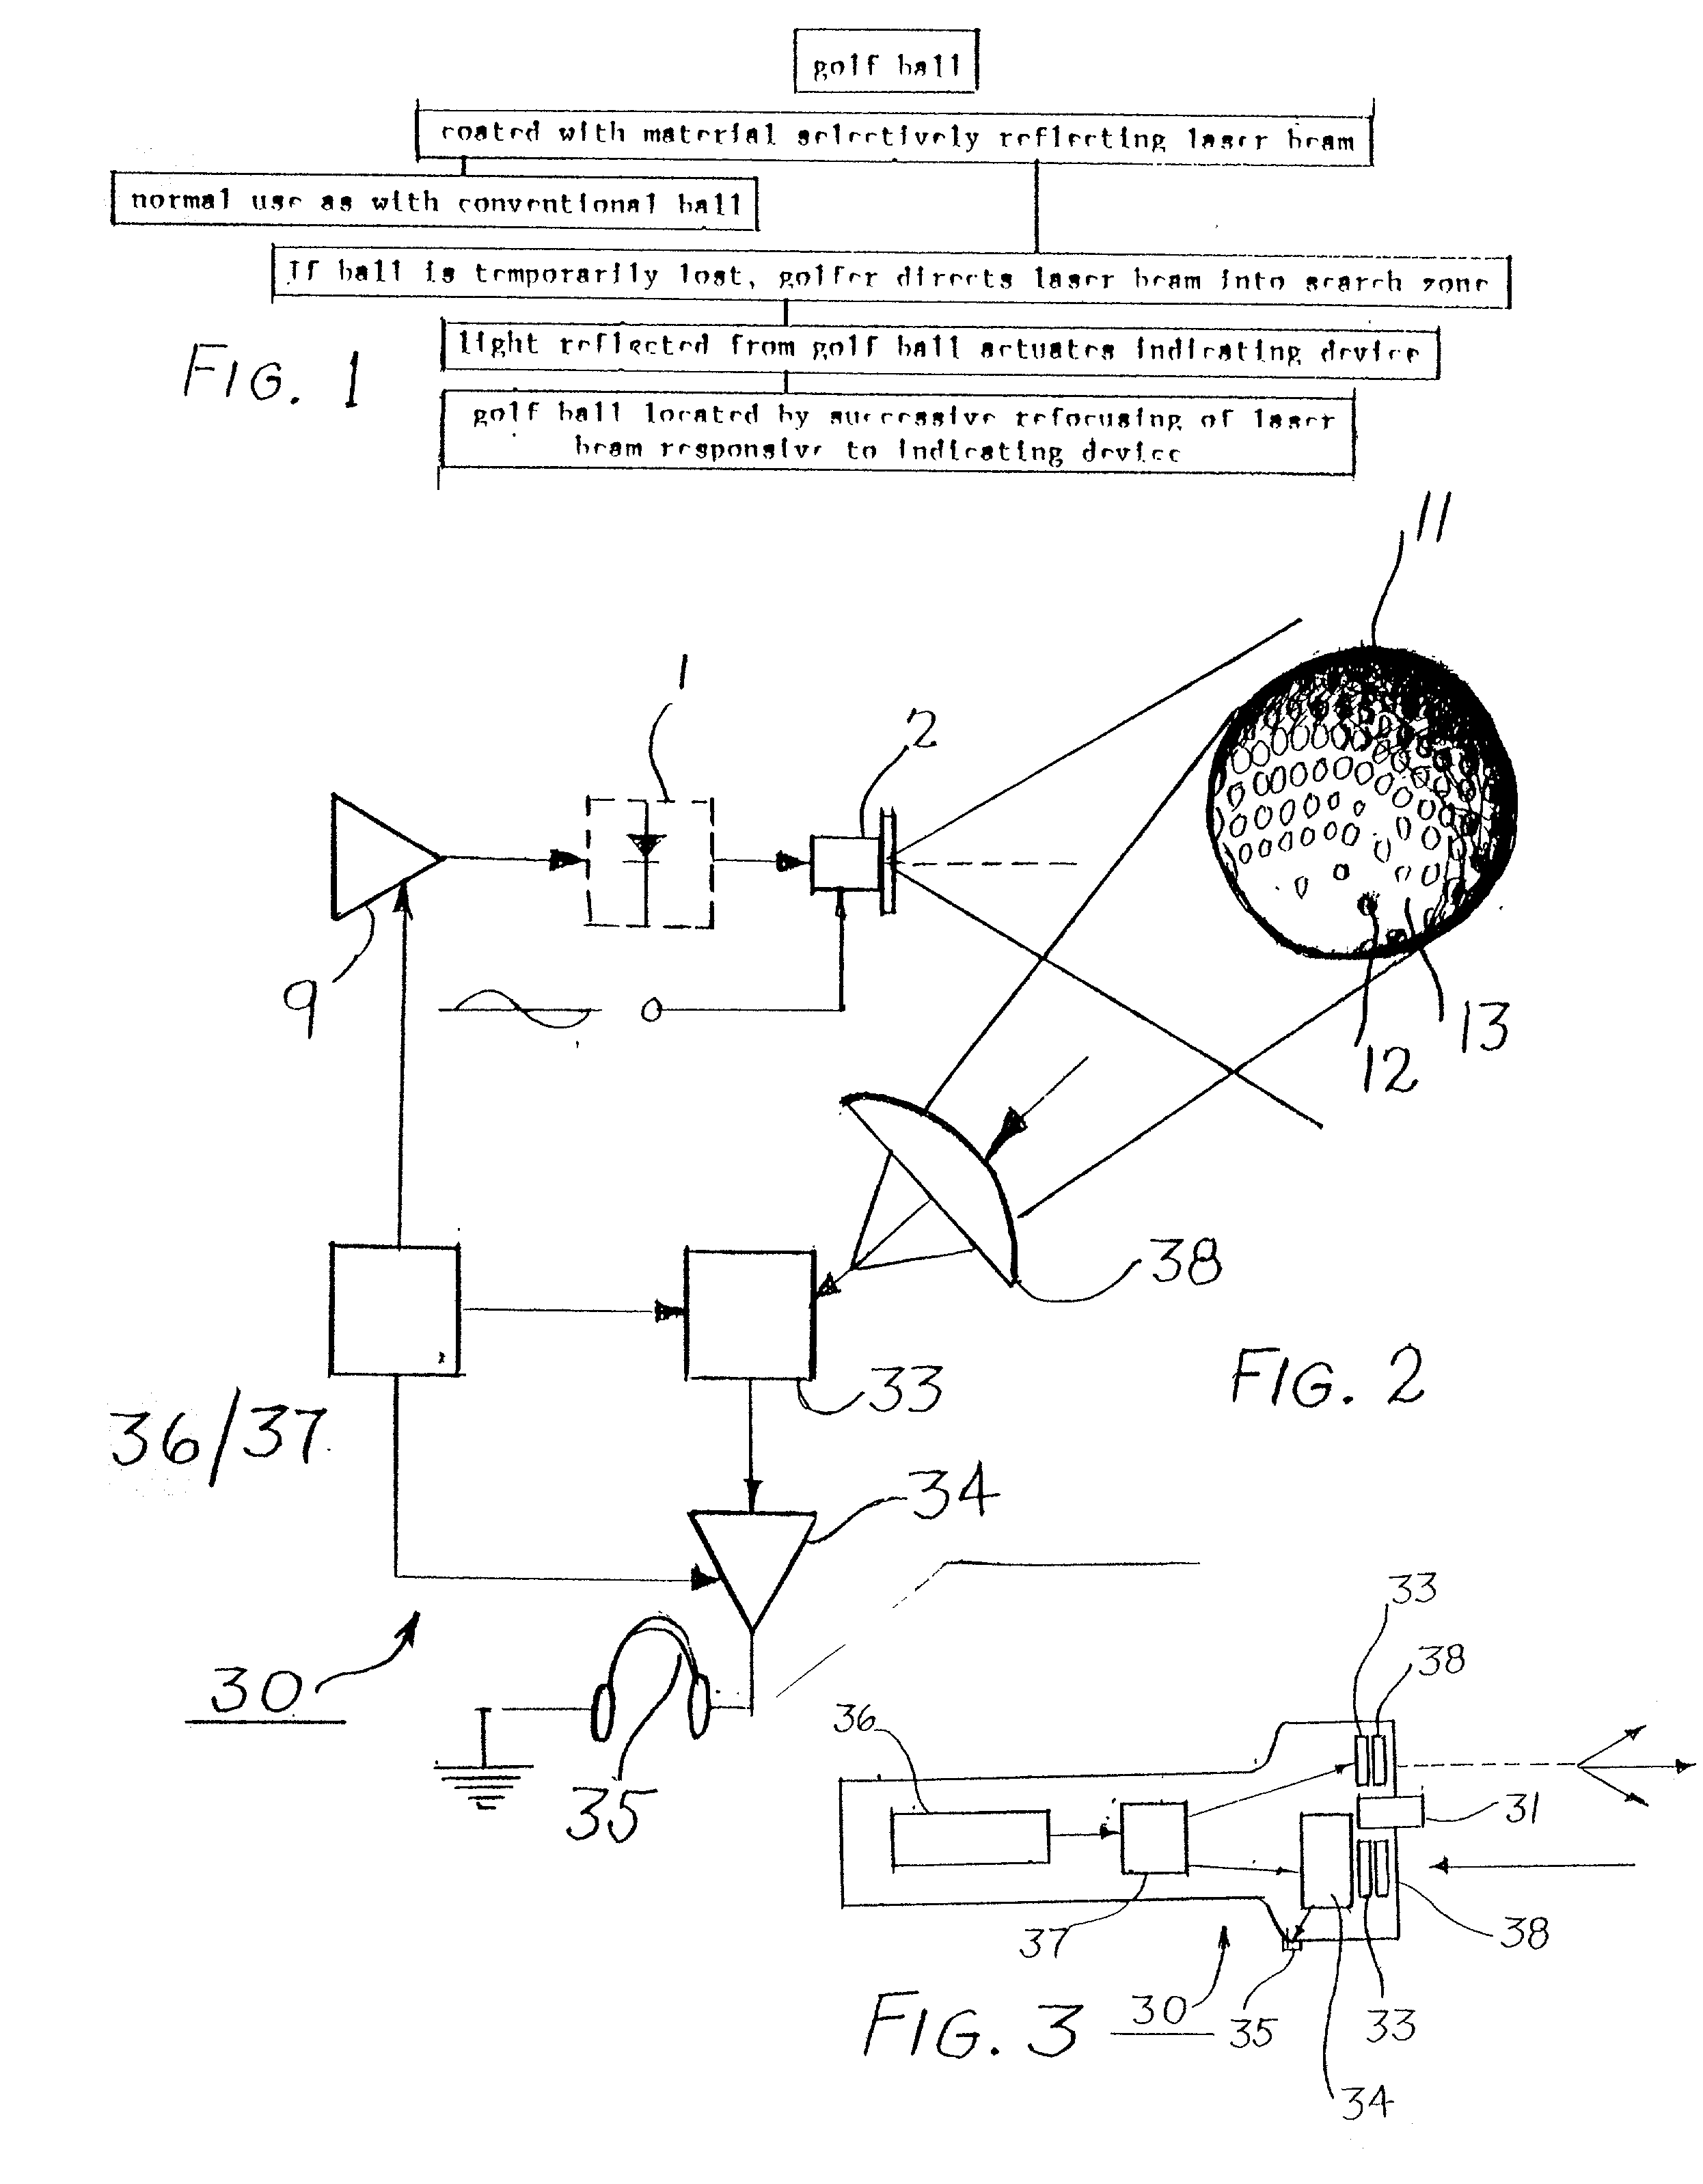 Infra-red laser device and method for searching for lost item